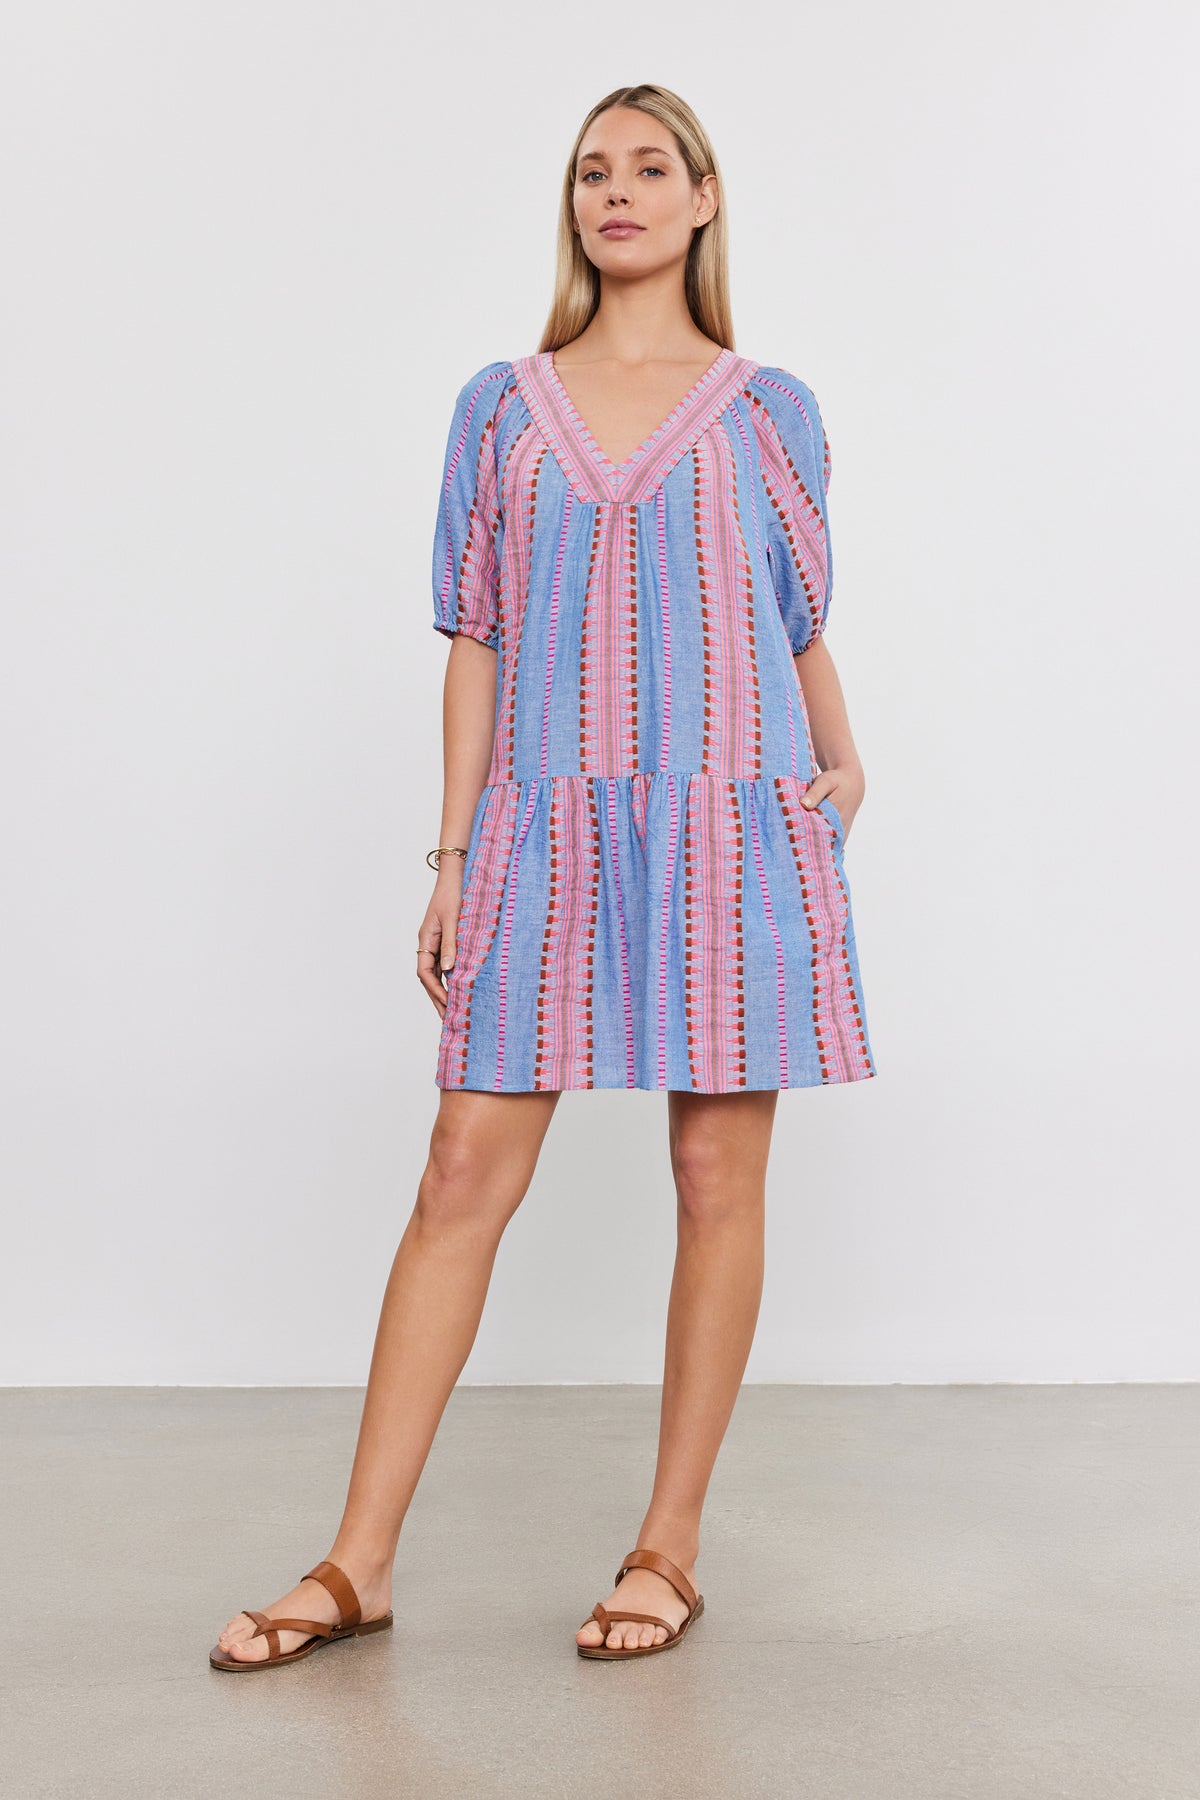 A woman in a ZOELLE DRESS by Velvet by Graham & Spencer with a v-neckline and sandals stands against a plain white background.-36910102315201